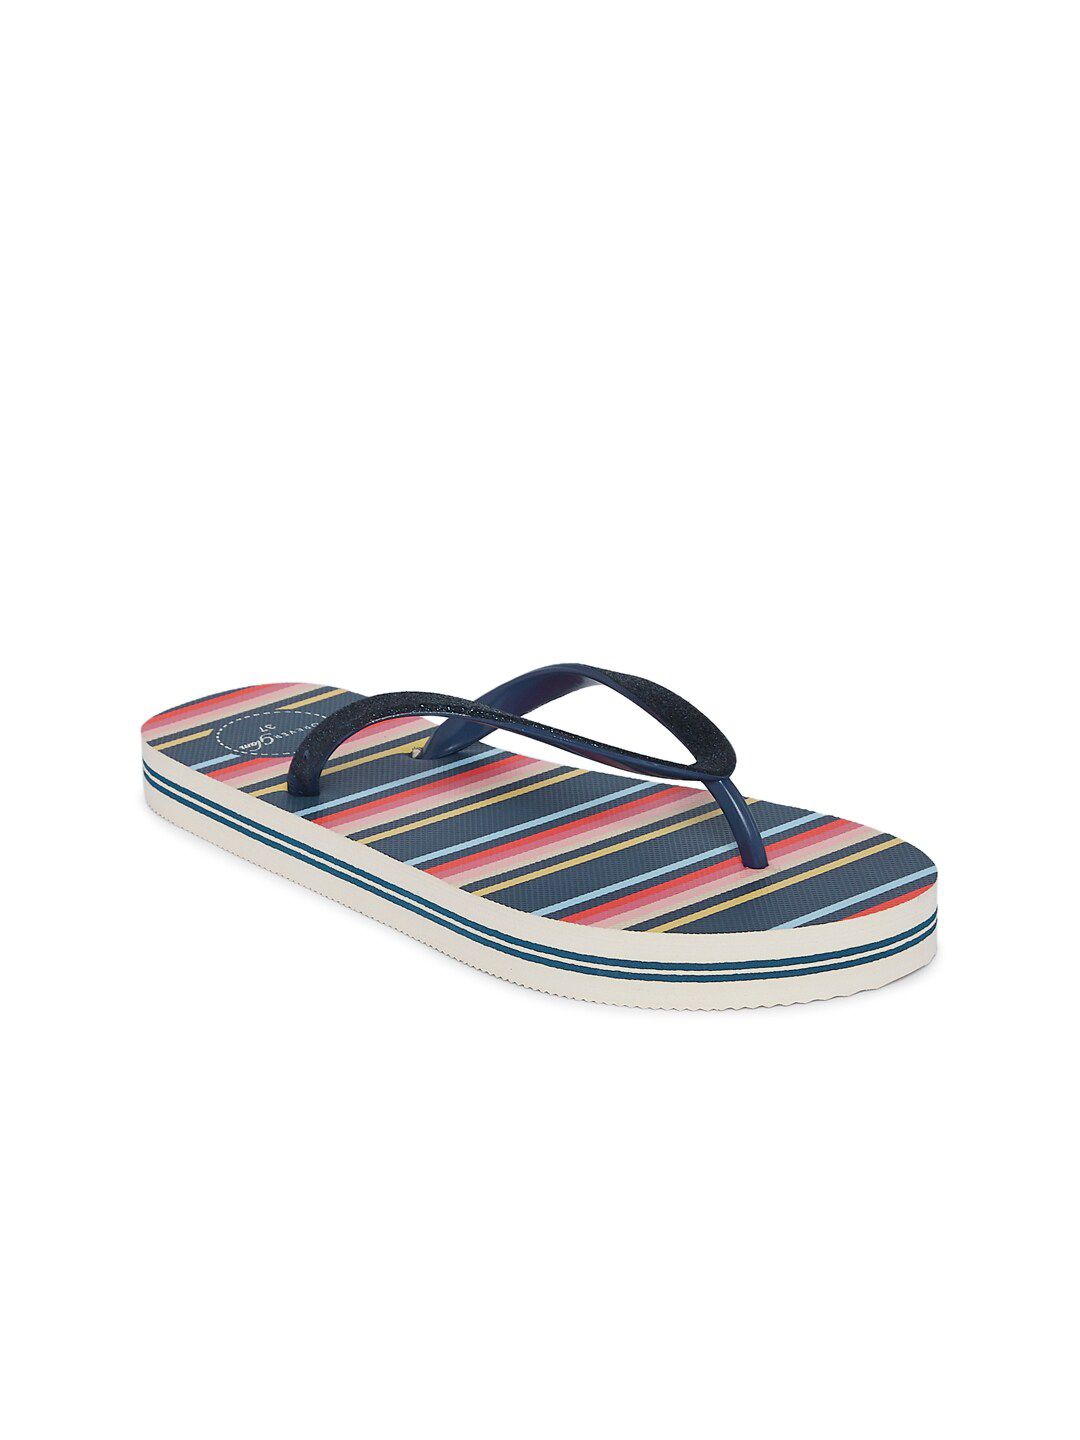 Forever Glam by Pantaloons Women Navy Blue & Pink Striped Thong Flip-Flops Price in India